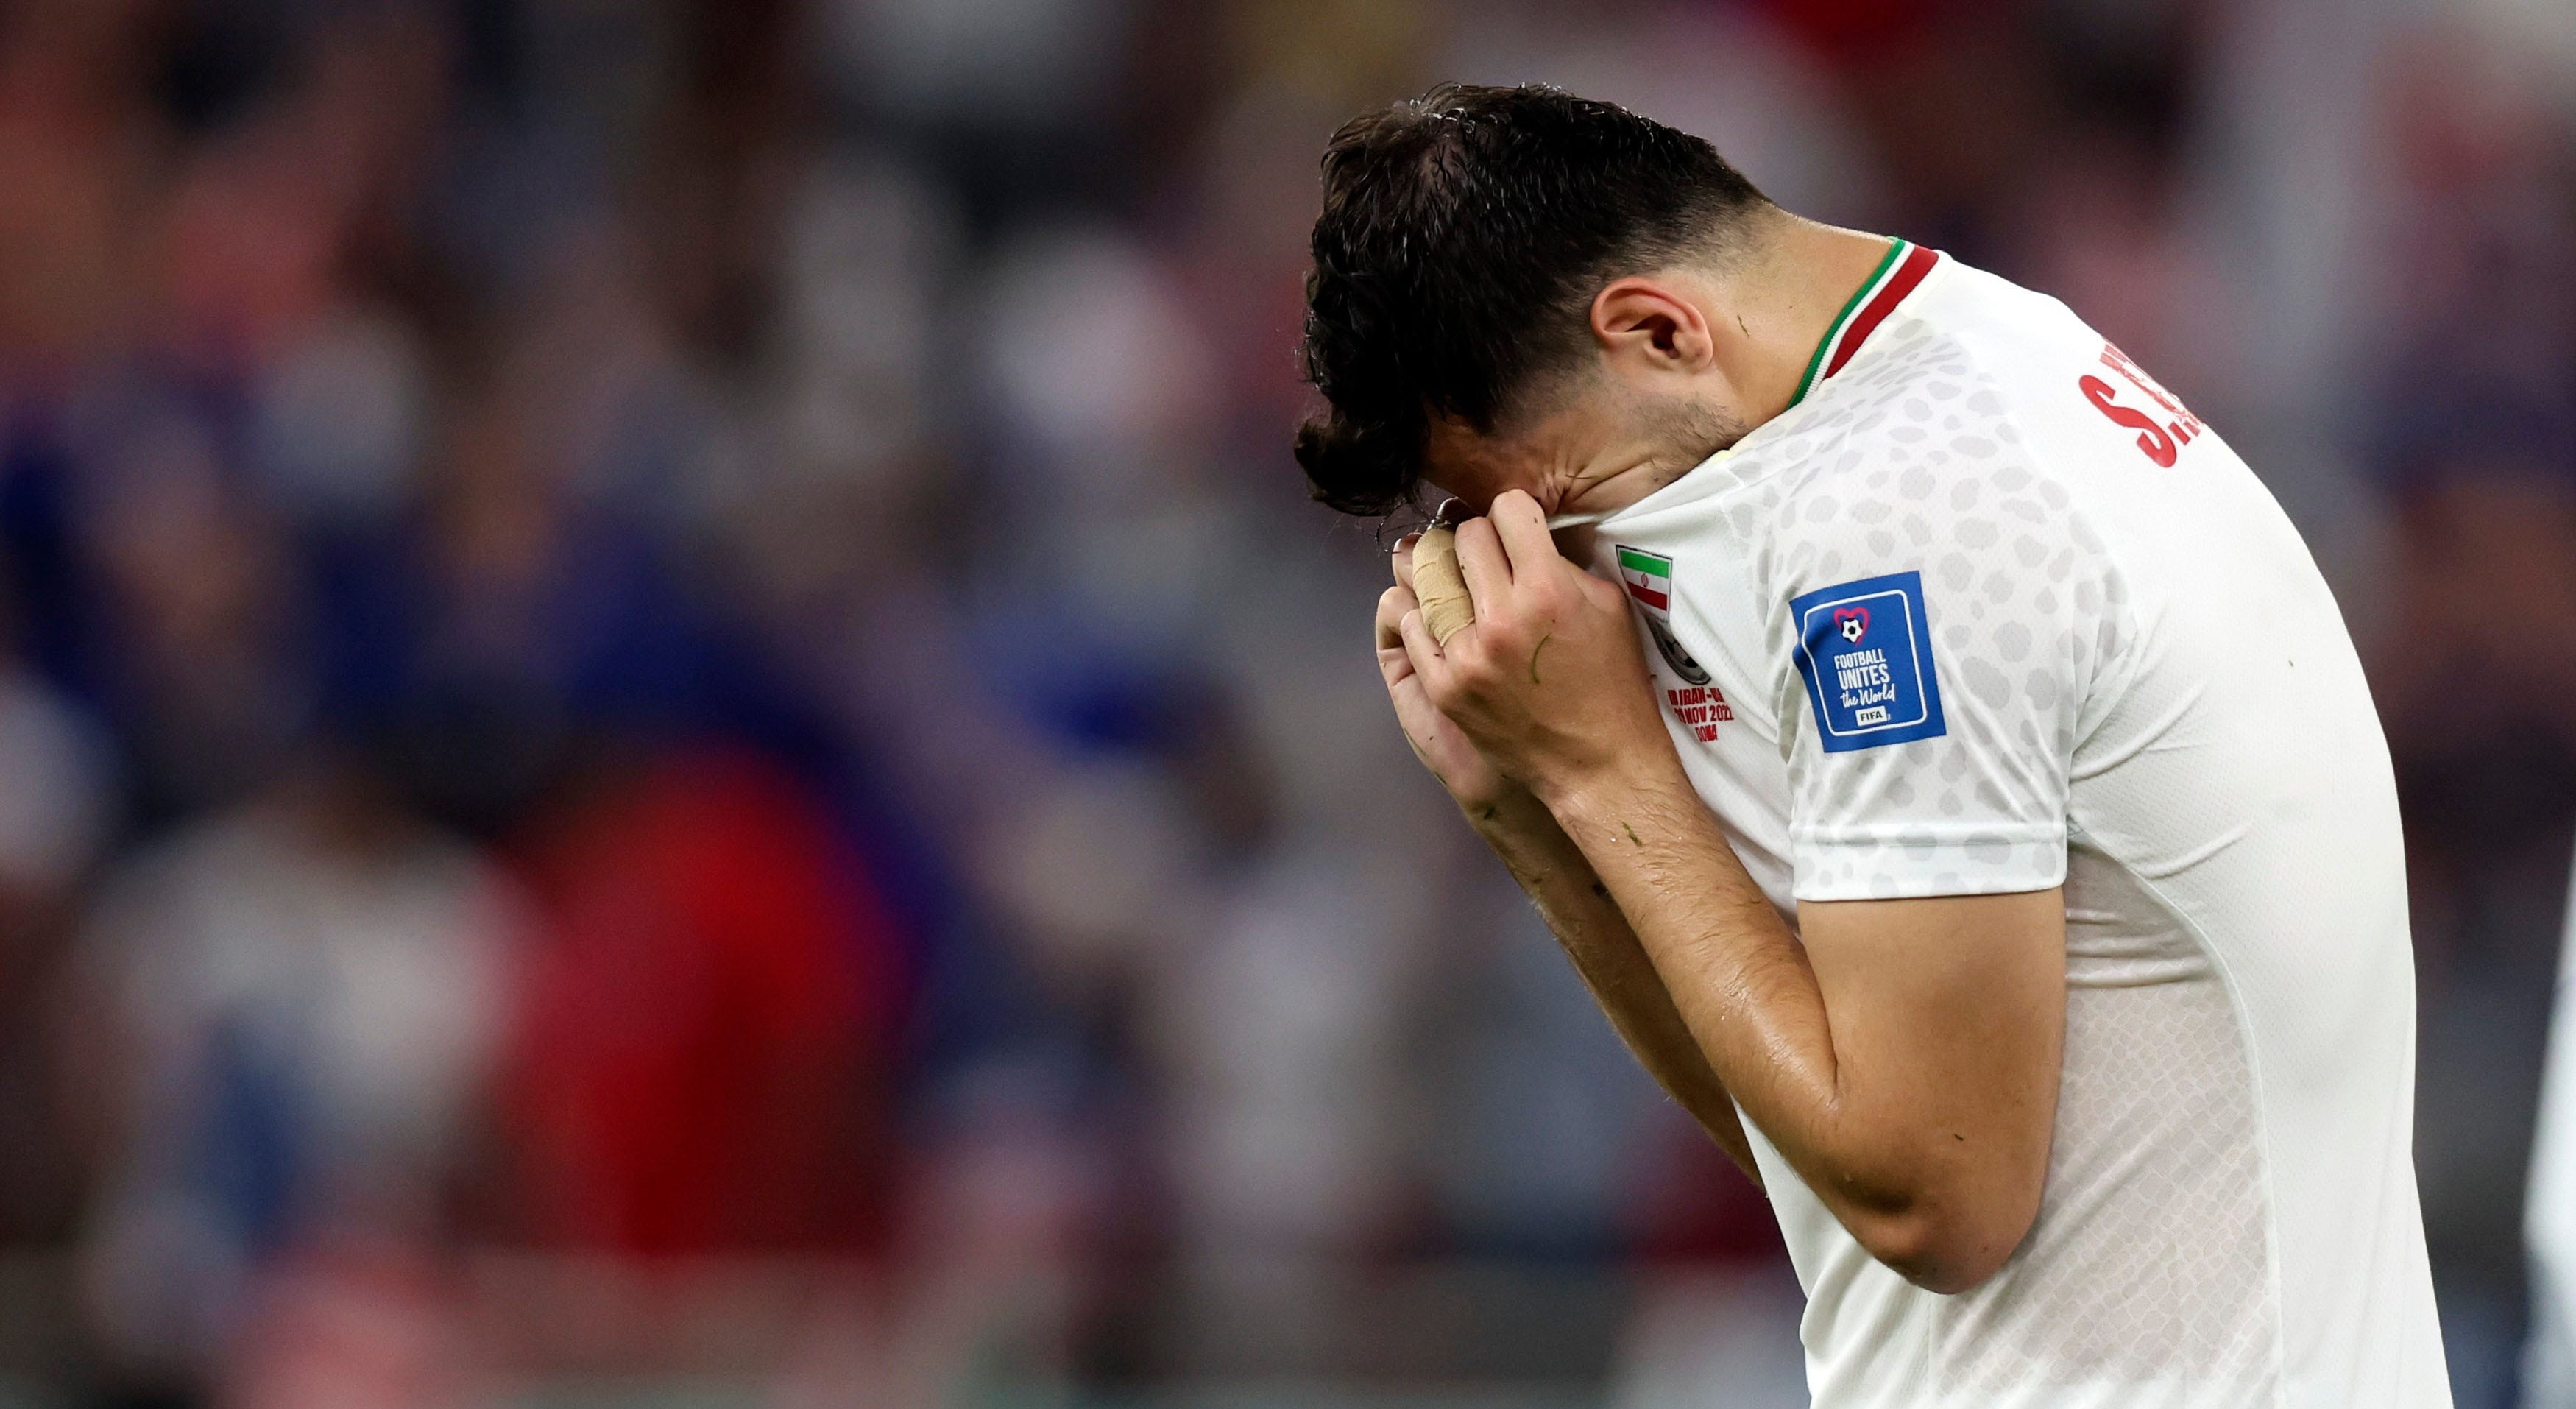 Friend Of Iranian Midfielder Killed By ‘Security Forces’ For Celebrating World Cup Loss To USA: Report